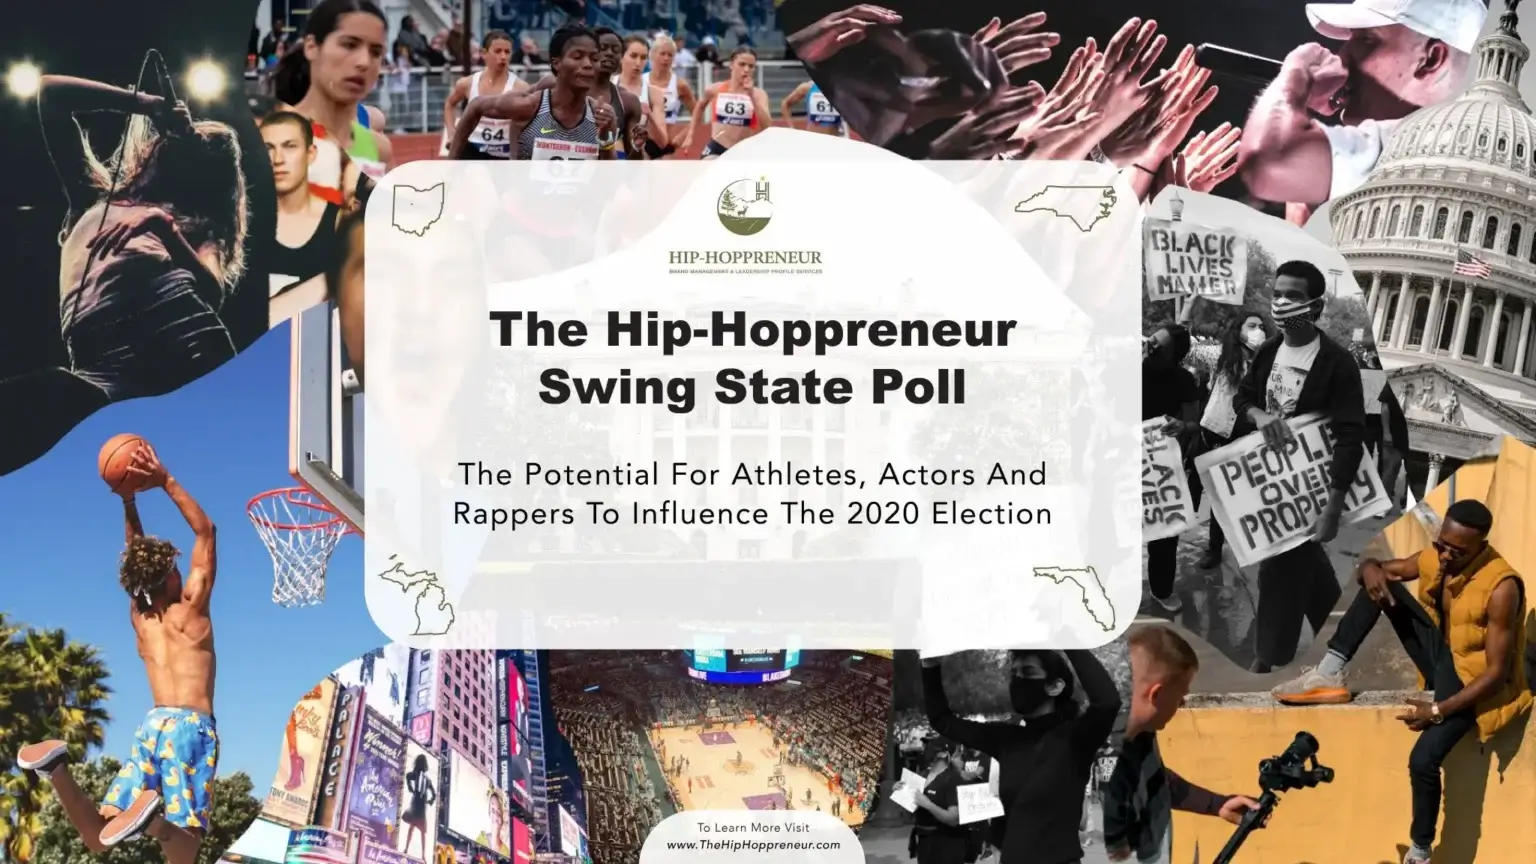 Poster of HipHoppreneur Swing State Poll that examined the potential for celebrities to influence the 2020 election.